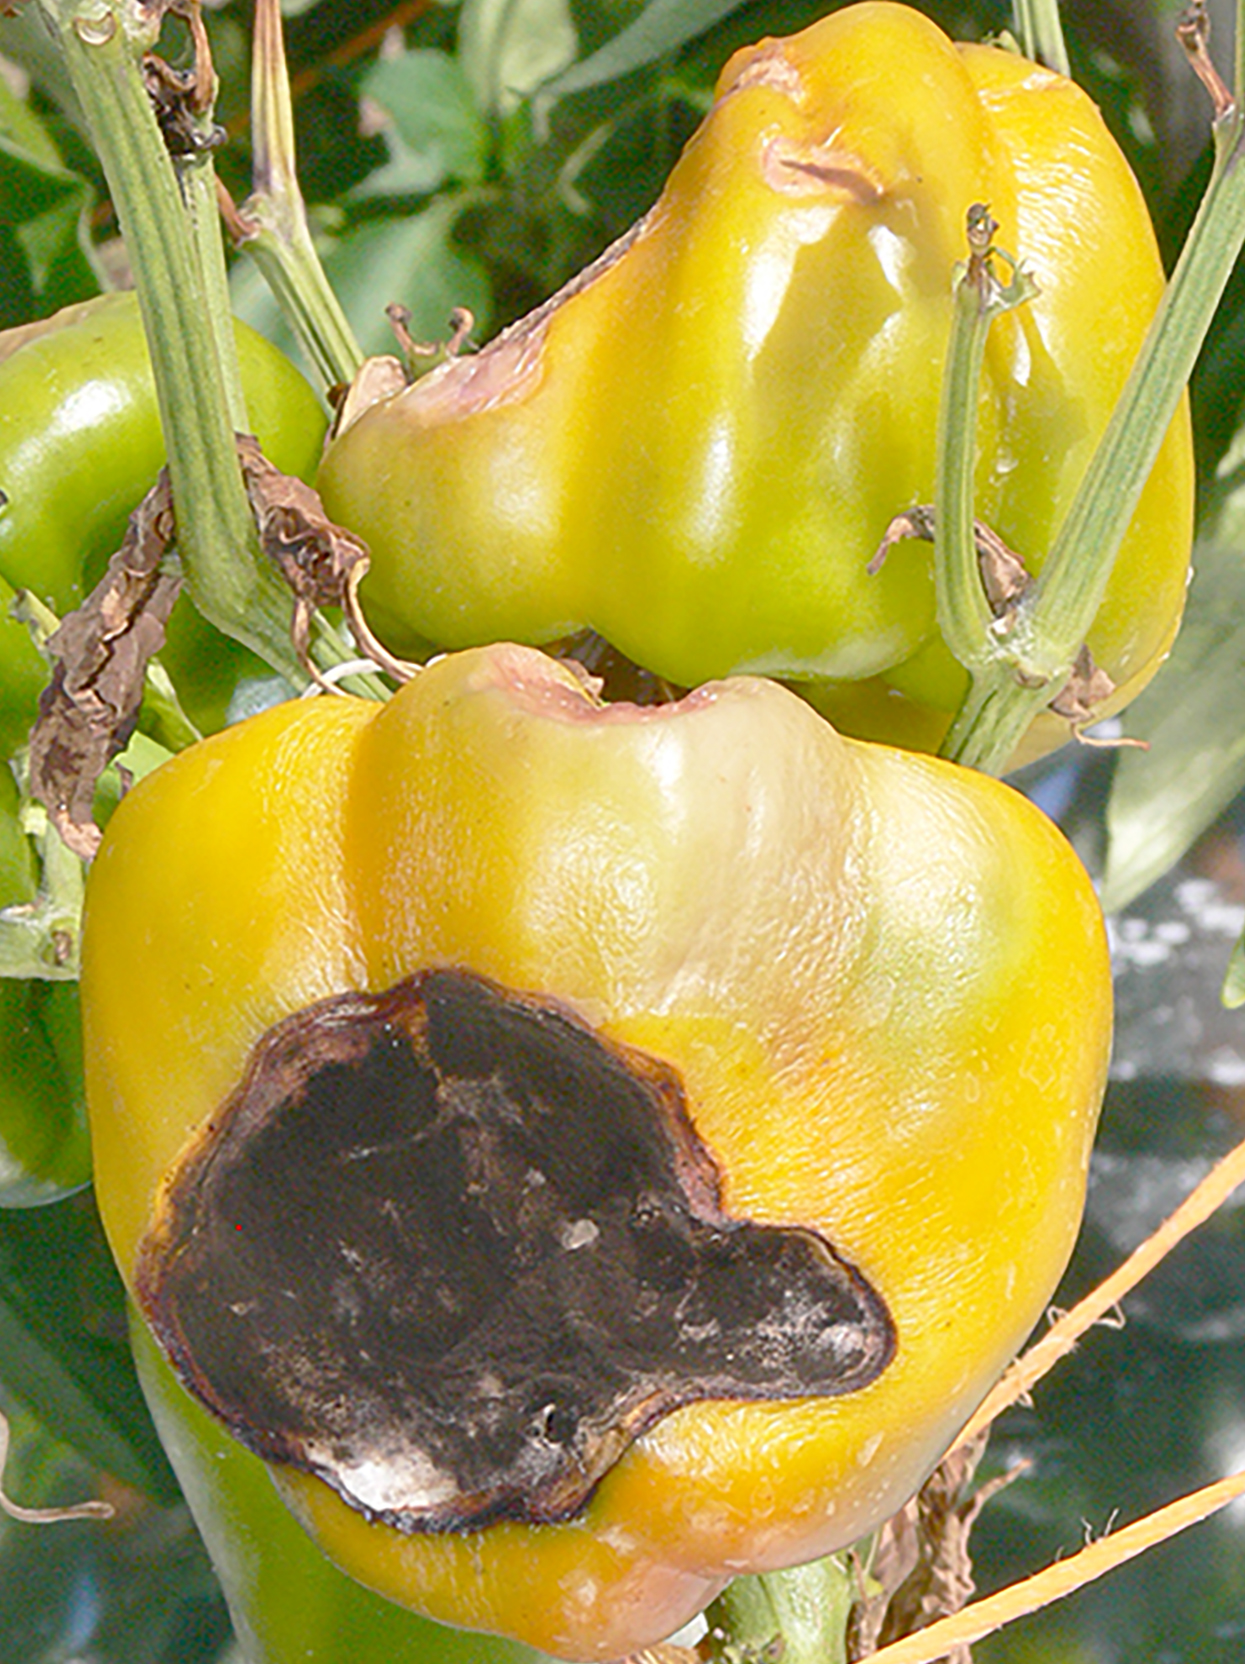 Pictured is a bell pepper scalded by the hot temperatures and not covered by shading.